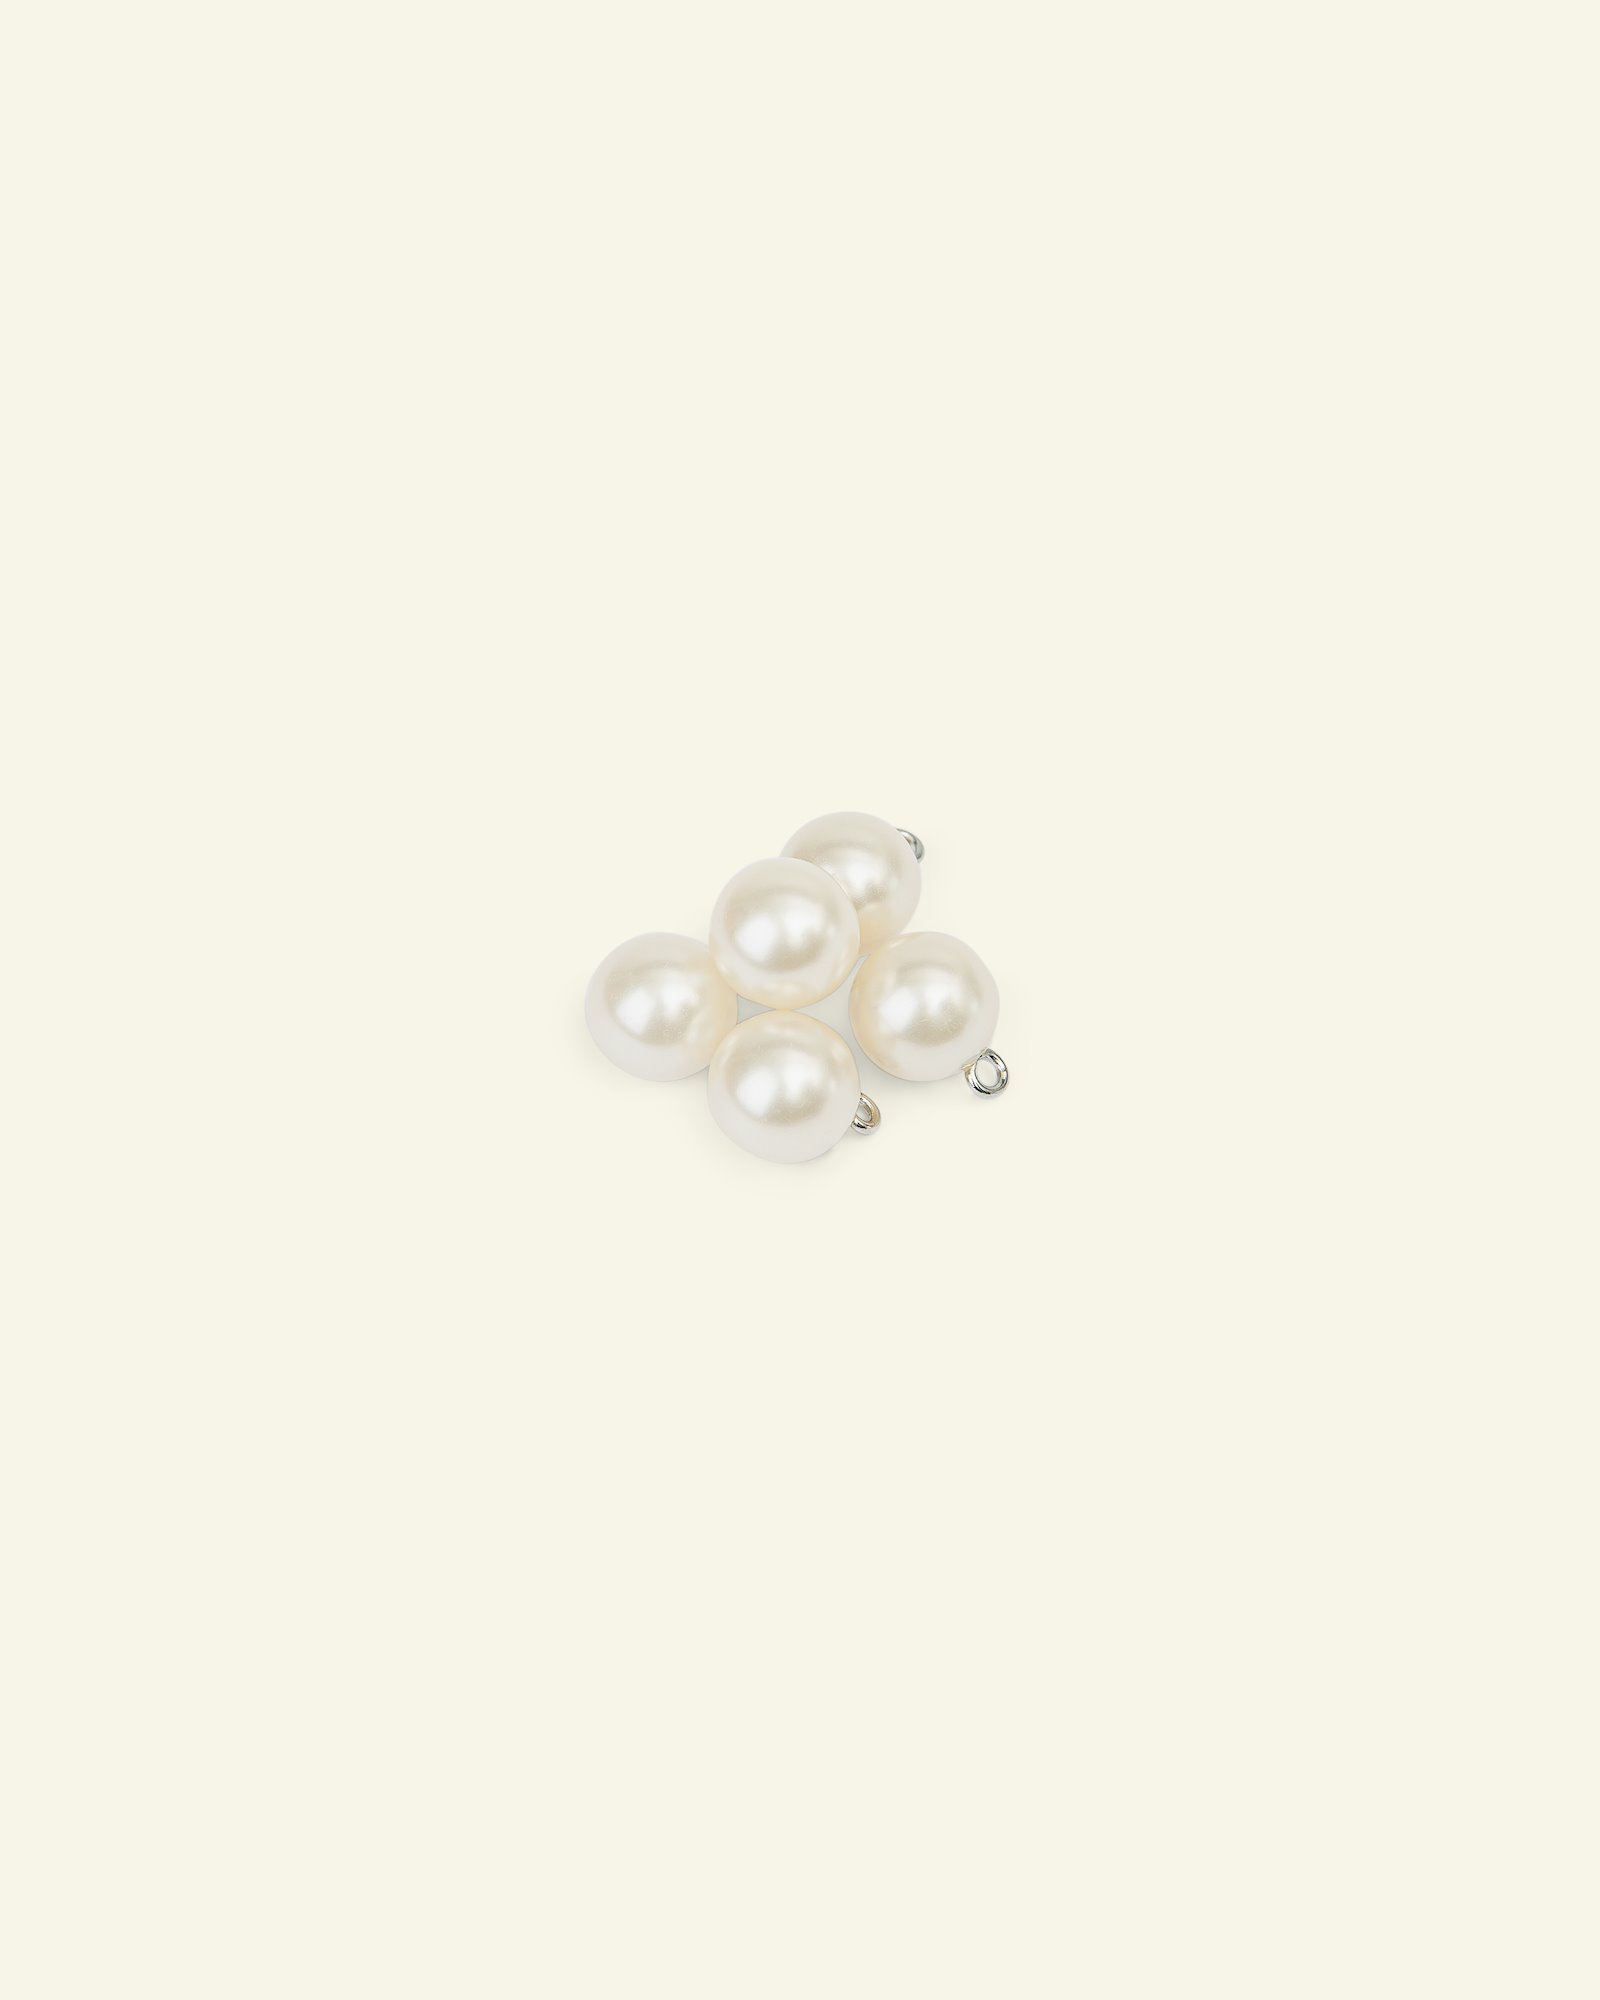 Shank button pearl 11mm white 5pcs 33080_pack